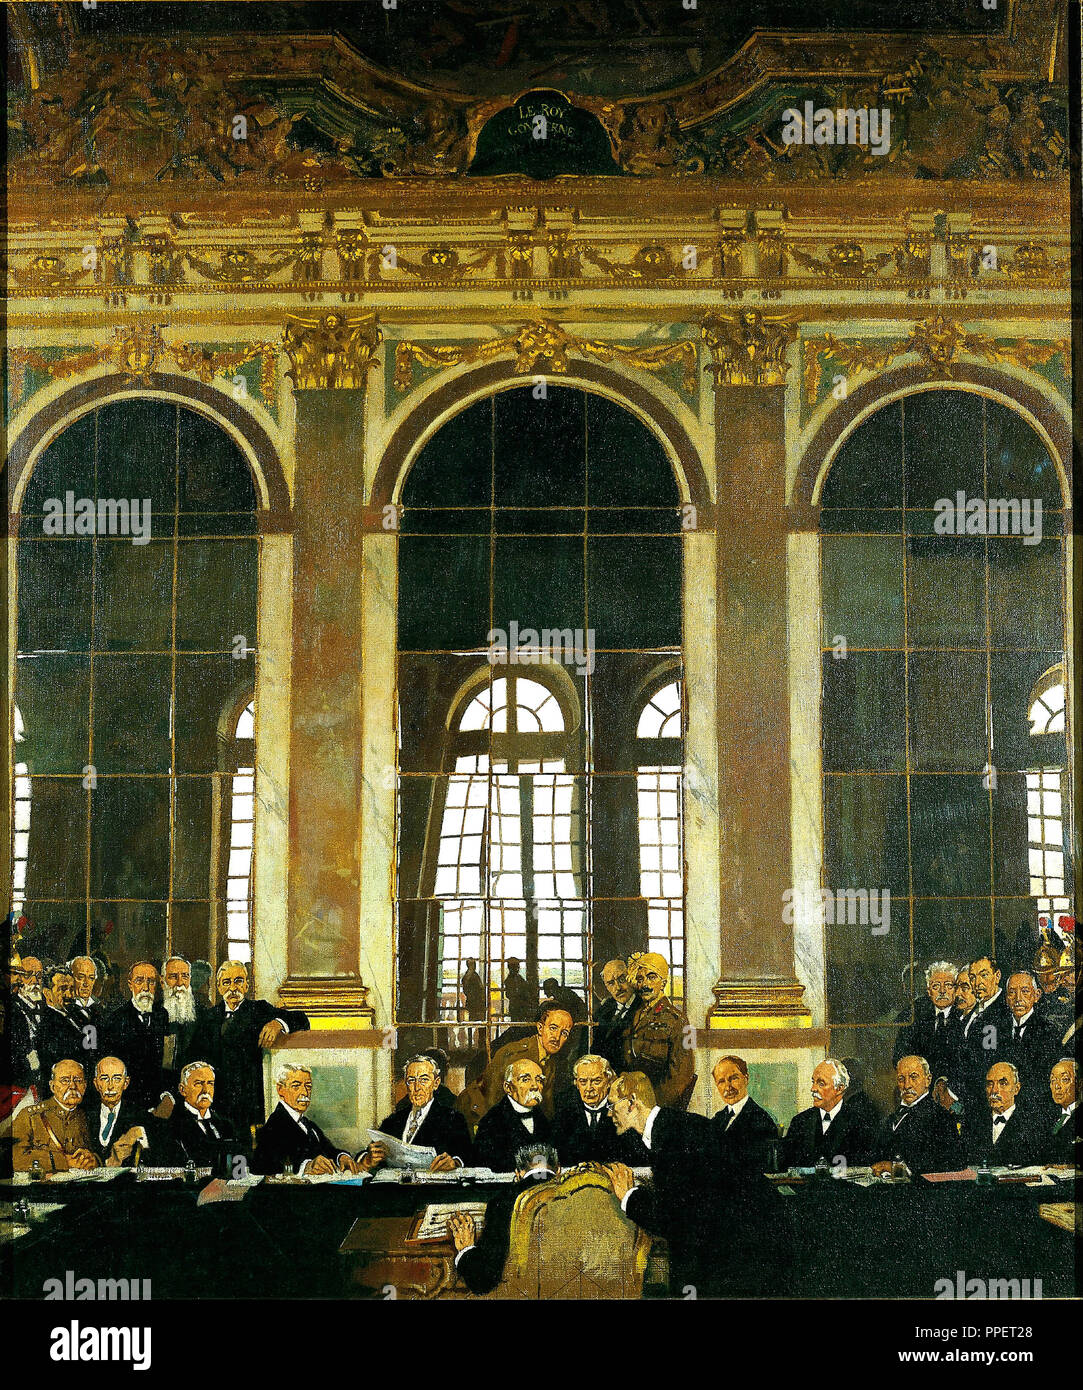 The Signing of Peace in the Hall of Mirrors, Versailles, 28th June 1919. Date/Period: 1919. Painting. Oil. Height: 1,524 mm (60 in); Width: 1,270 mm (50 in). Author: William Orpen. Stock Photo